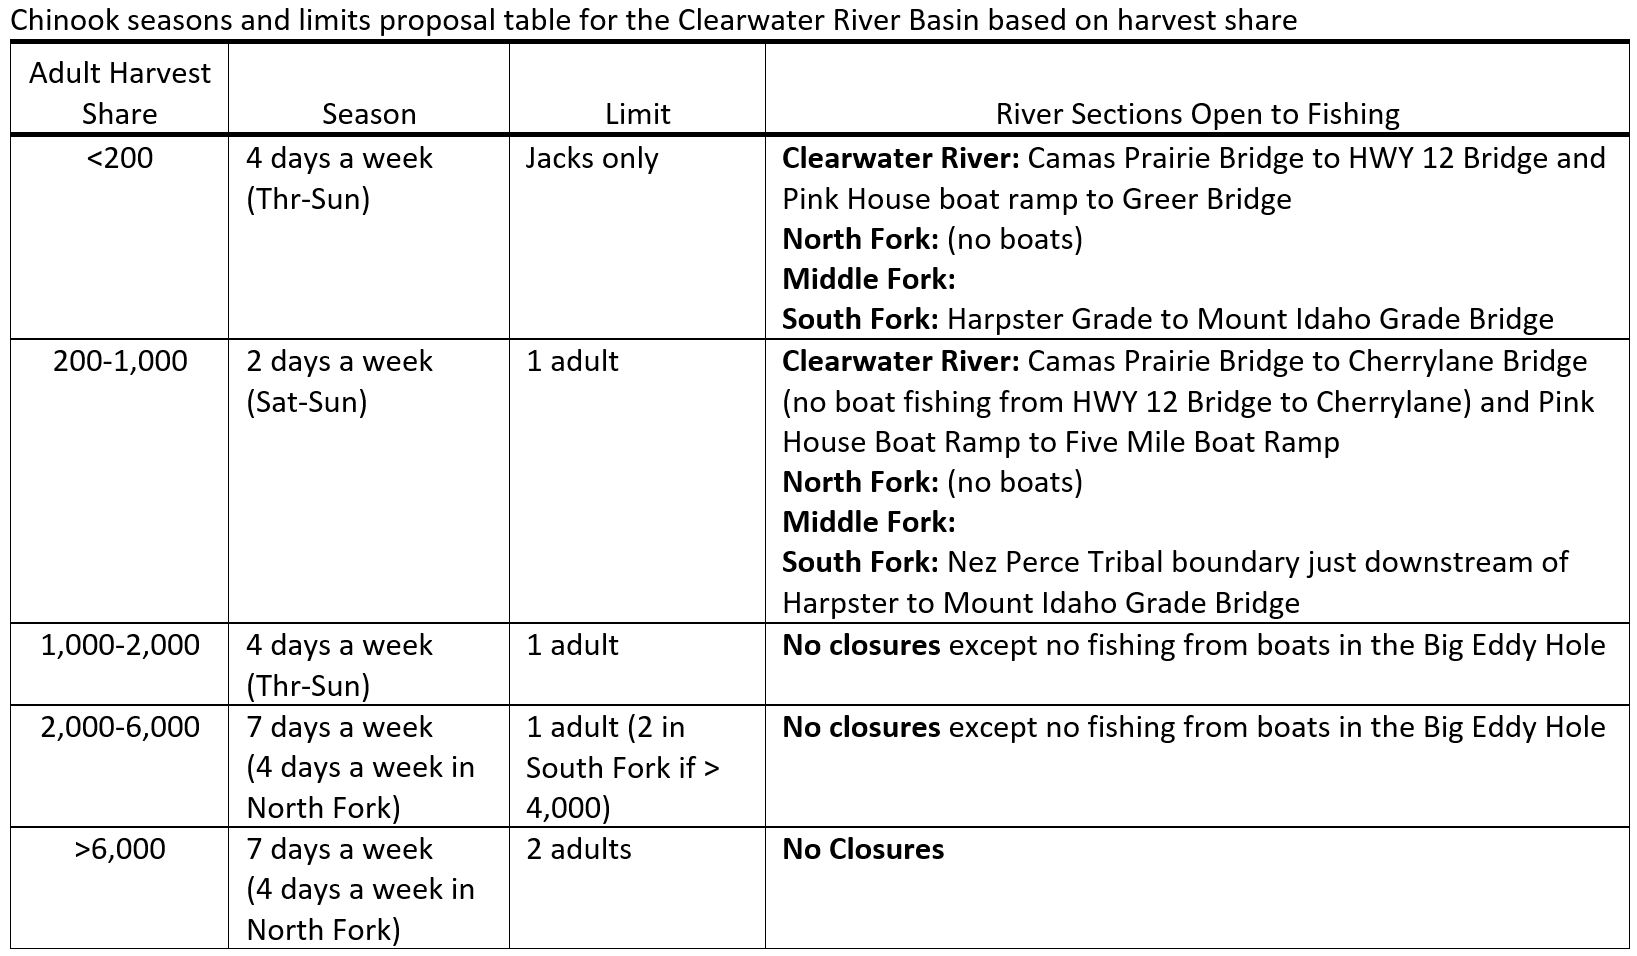 Chinook seasons and limits proposal table for the Clearwater Water River basin based on harvest share